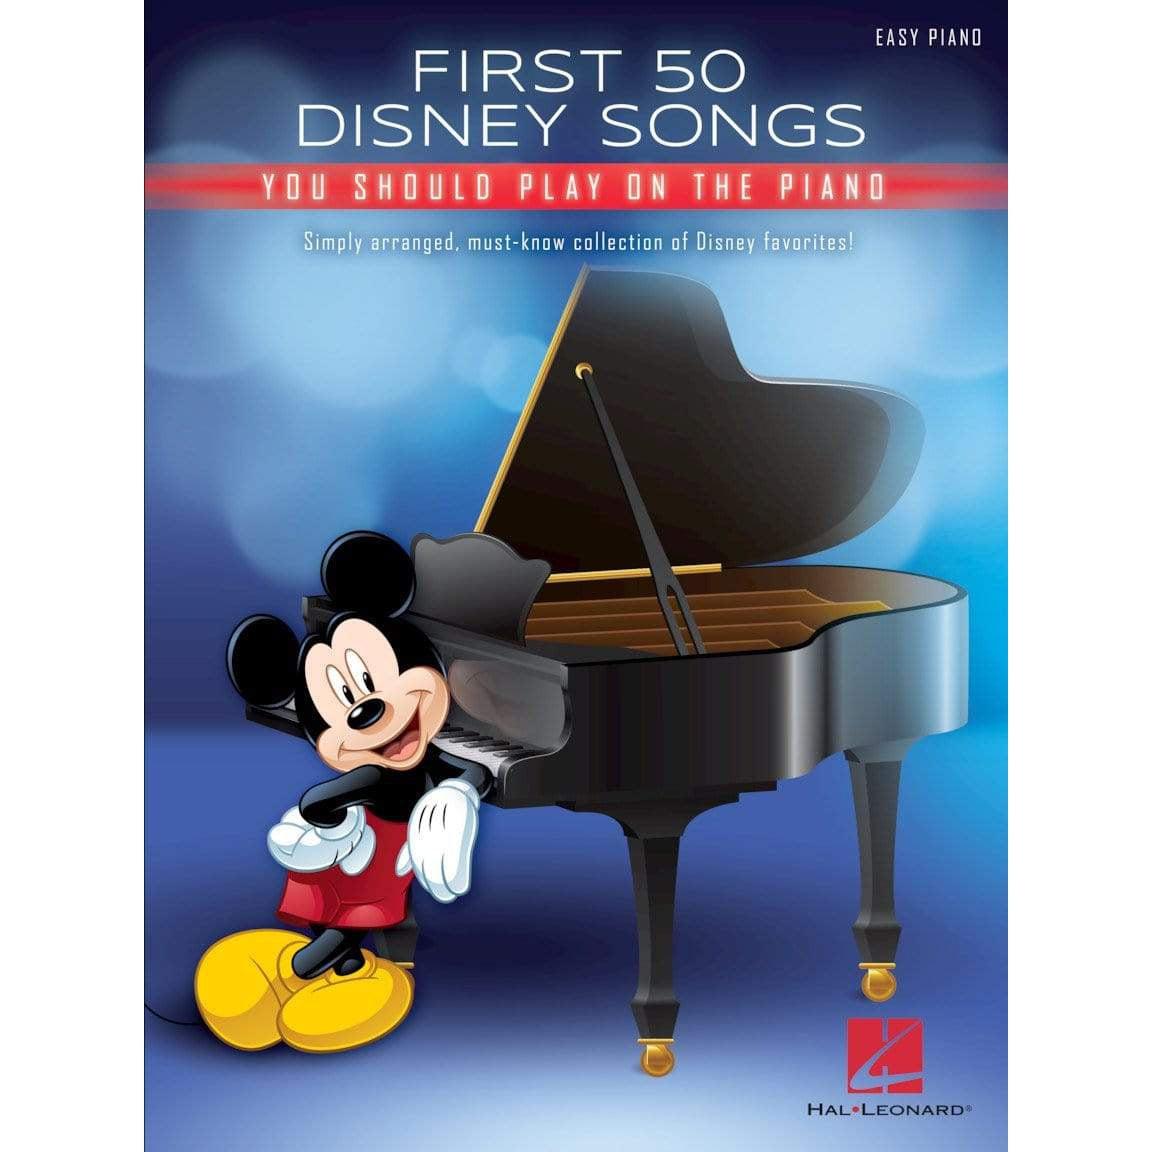 Hal leonard First 50 Disney Songs You Should Play on the Piano – Yandas  Music